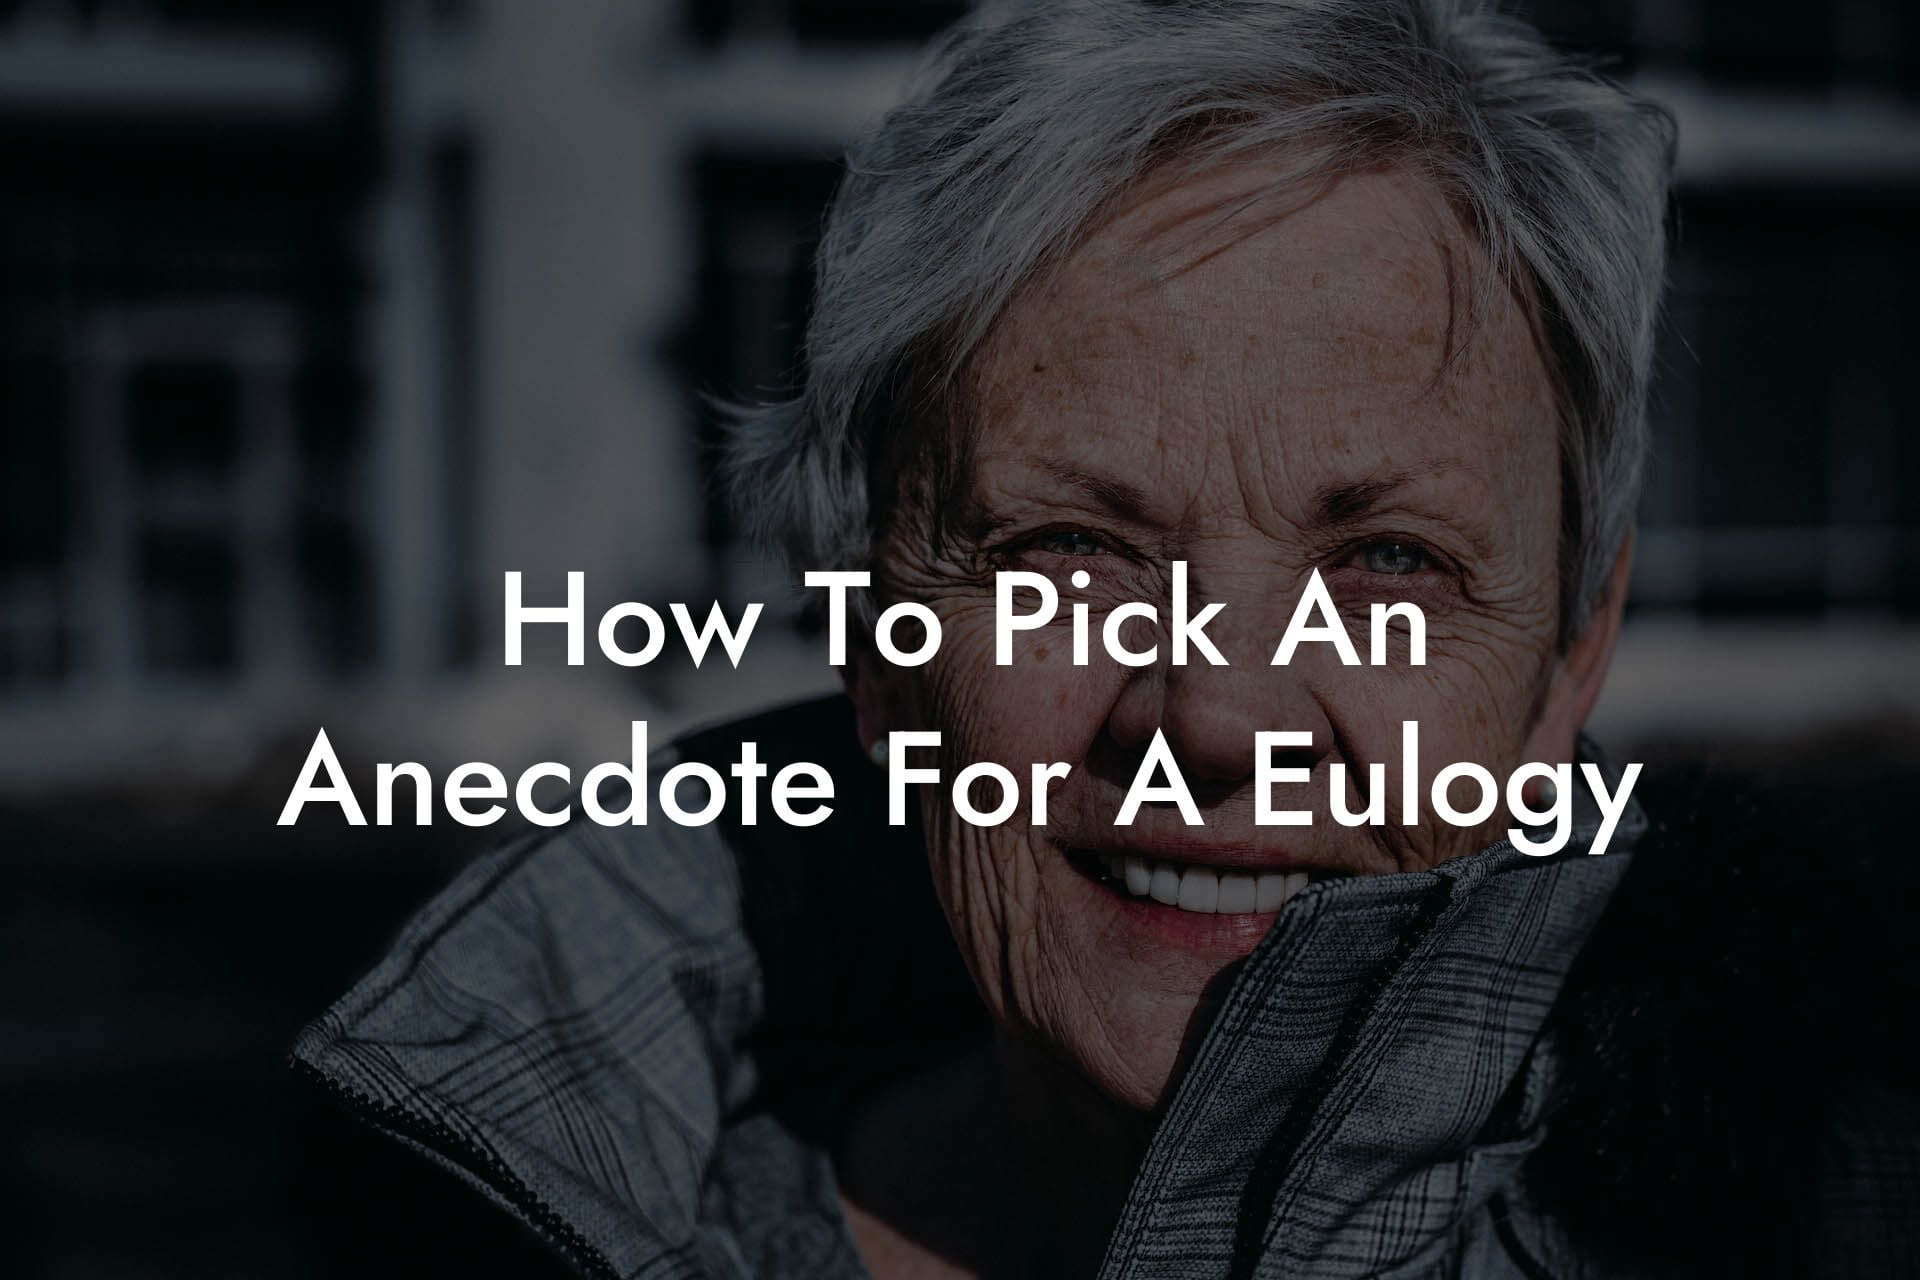 How To Pick An Anecdote For A Eulogy